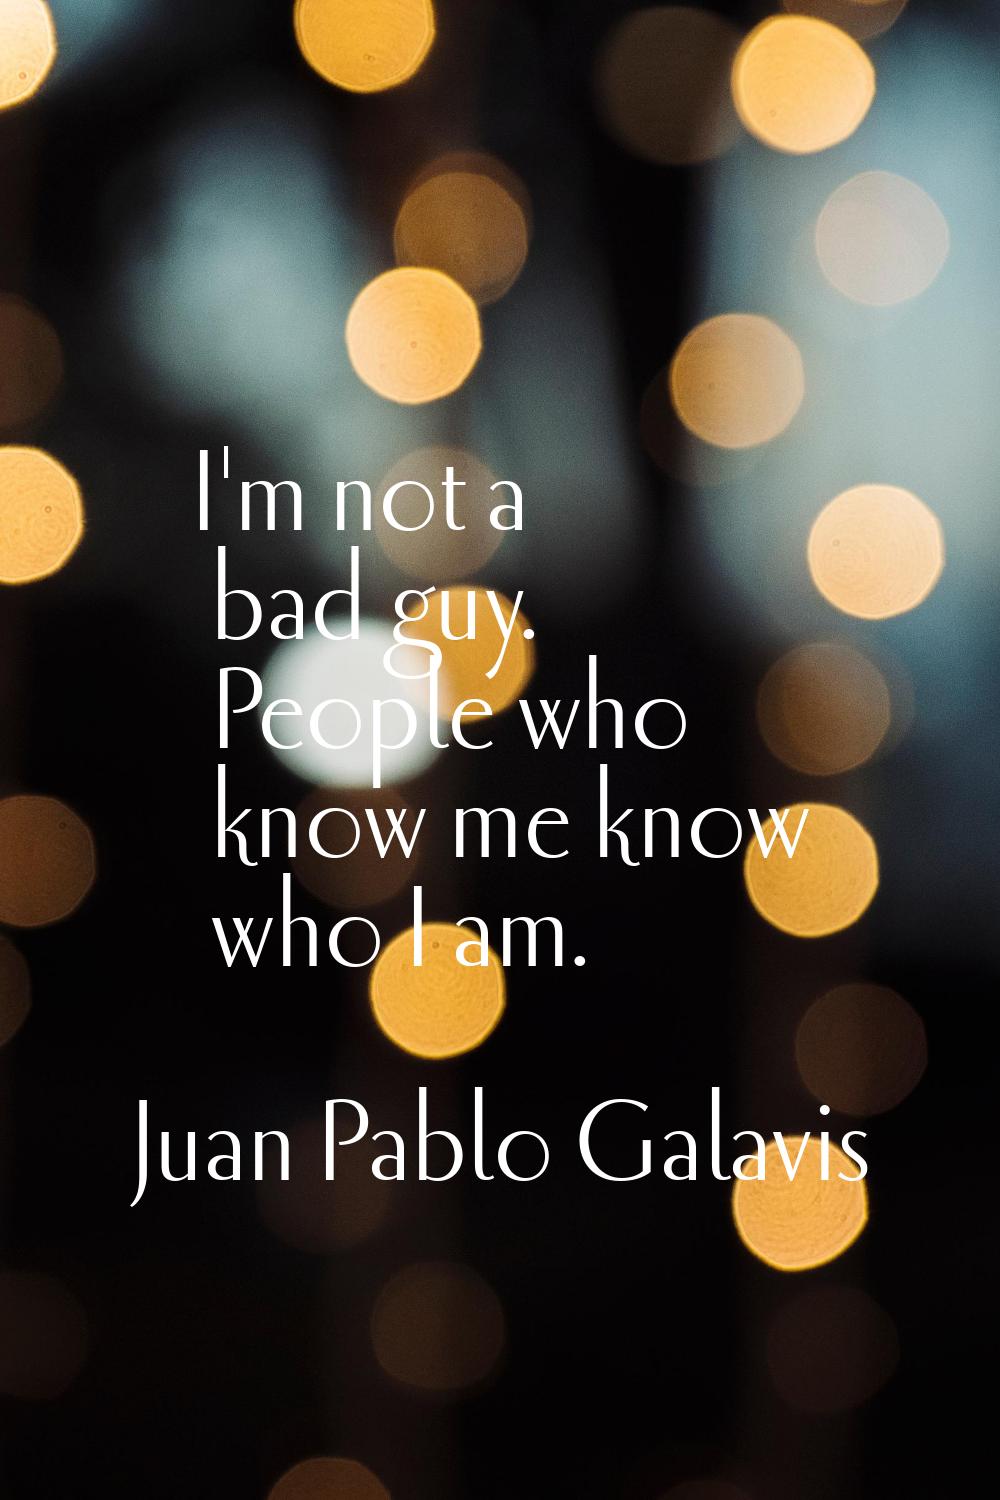 I'm not a bad guy. People who know me know who I am.